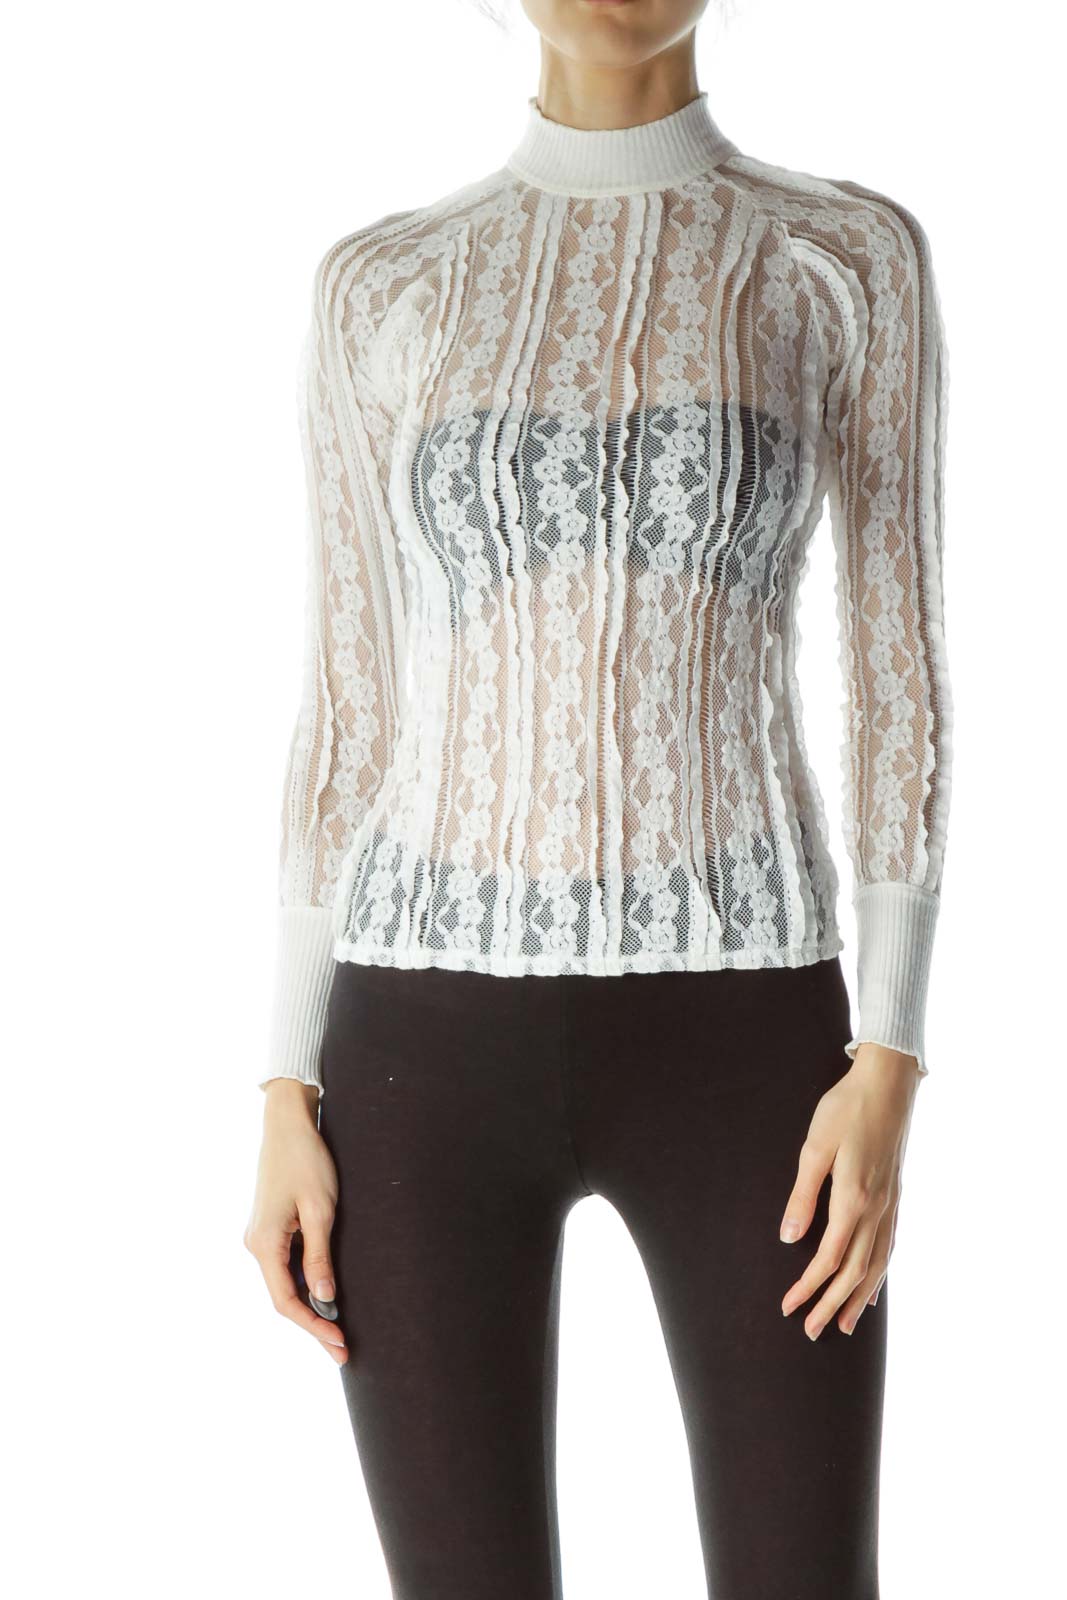 White High-Neck Lace Long Sleeve Blouse Front